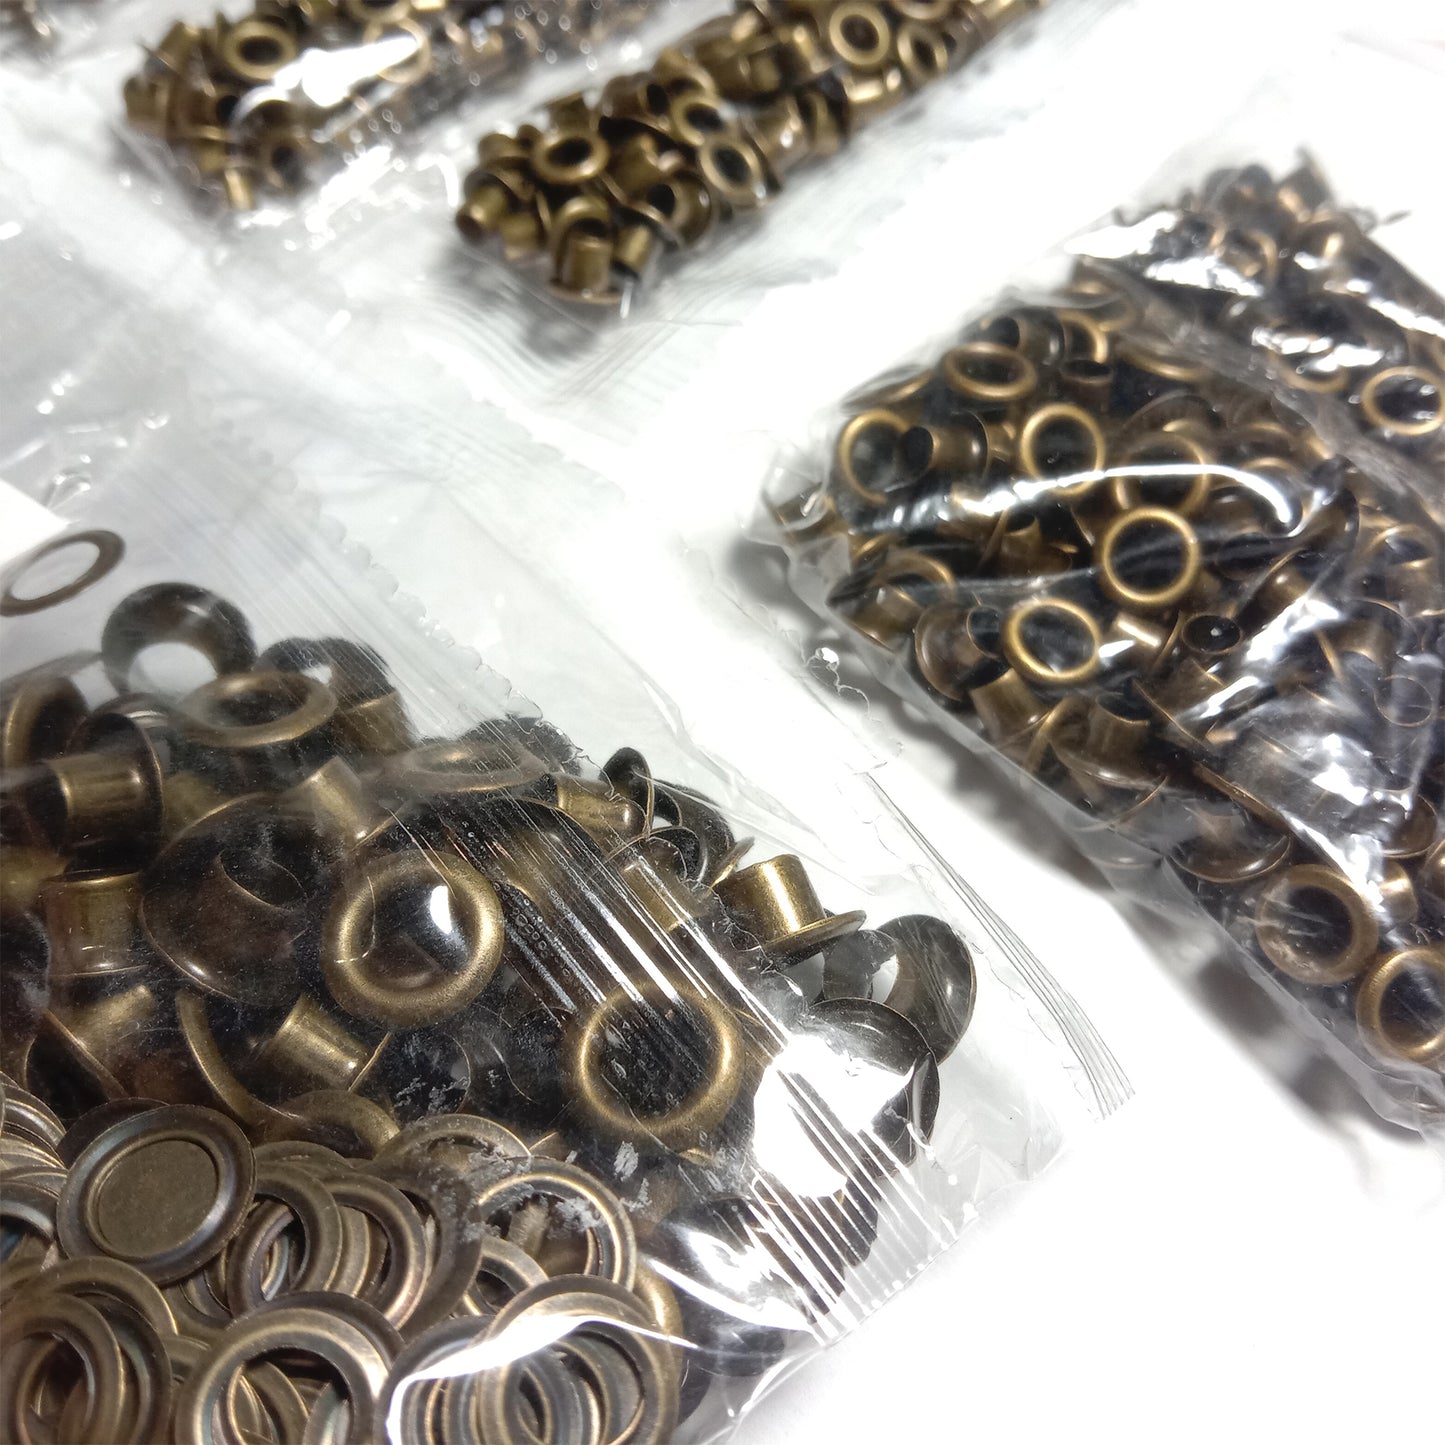 4x200pcs Set of 2mm 3mm 3.5mm 5mm Deep Eyelets For Belts No Washers Metal Buttonholes Buckle Clothing Buttons Bronze Craft